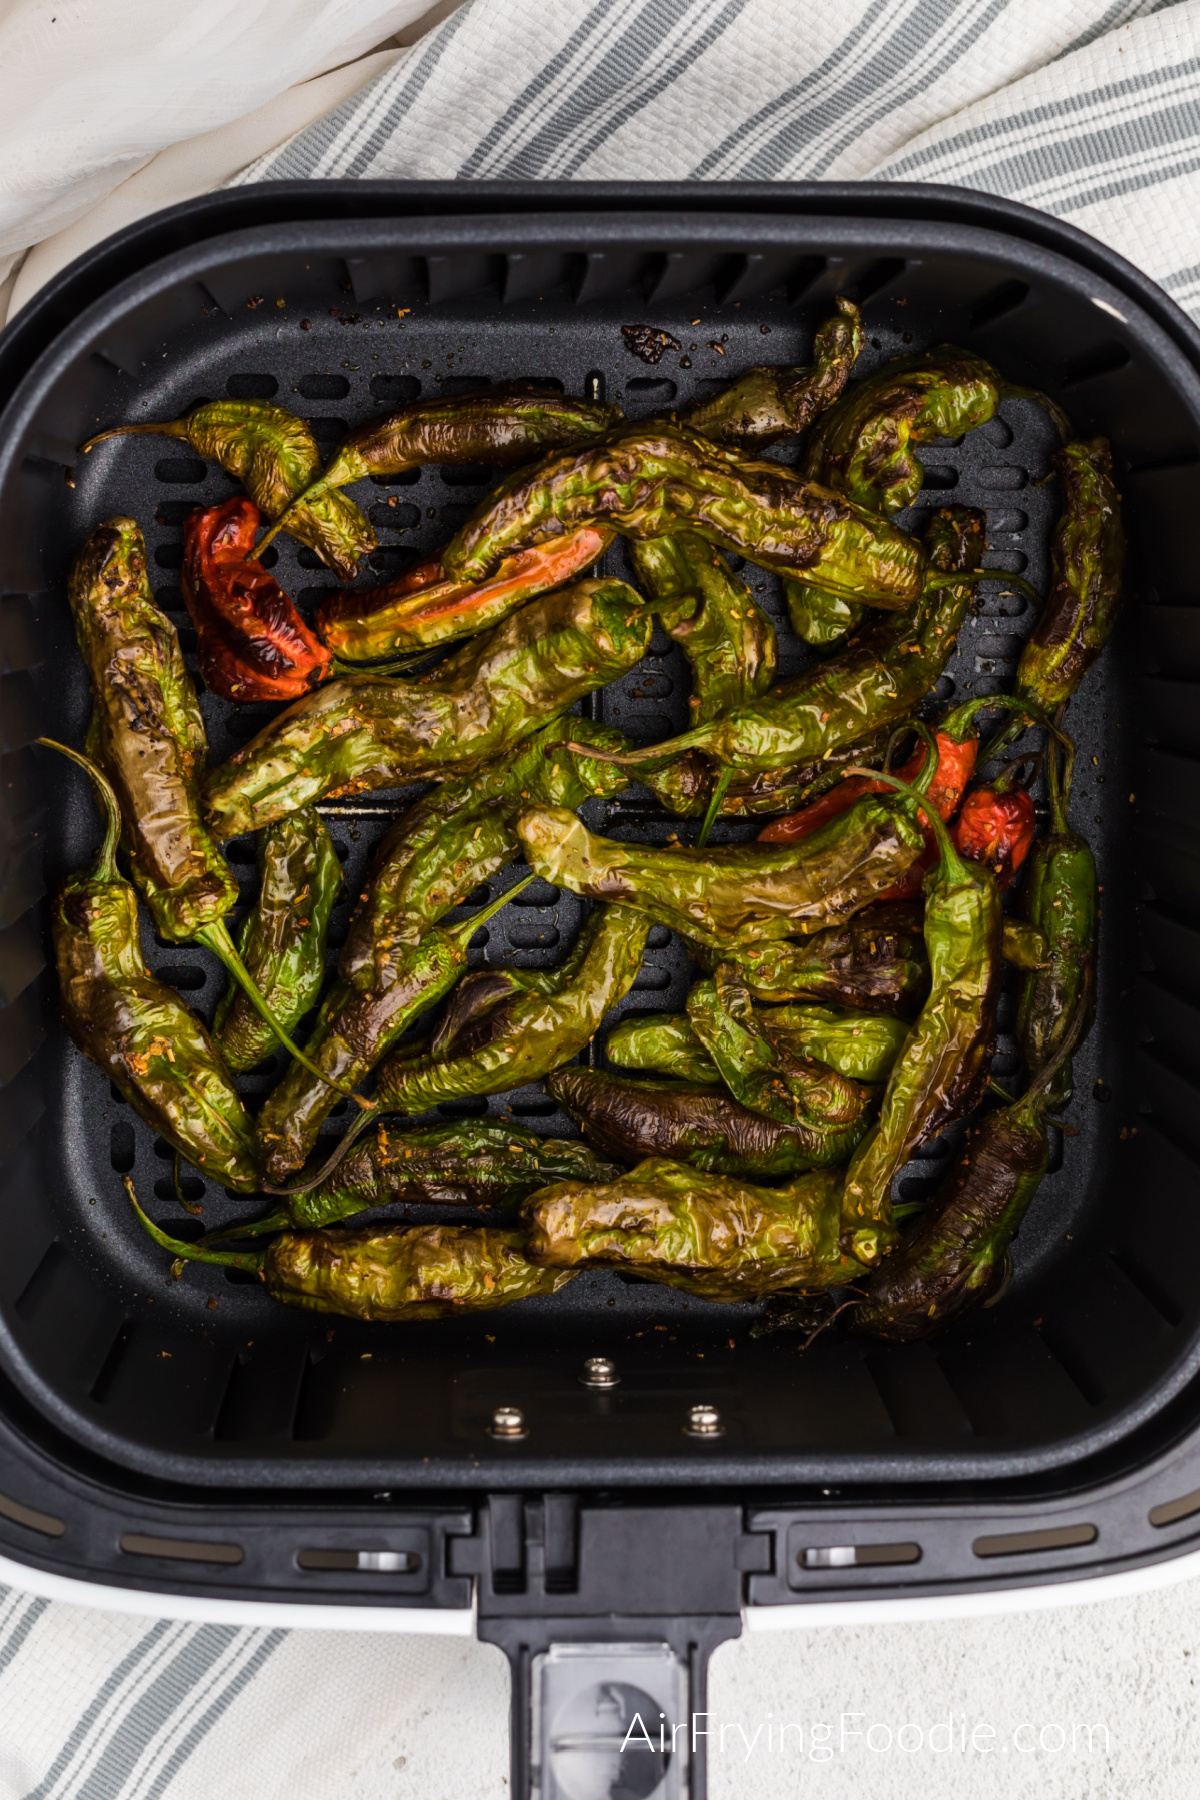 Air fried shishito peppers in the basket of the air fryer.